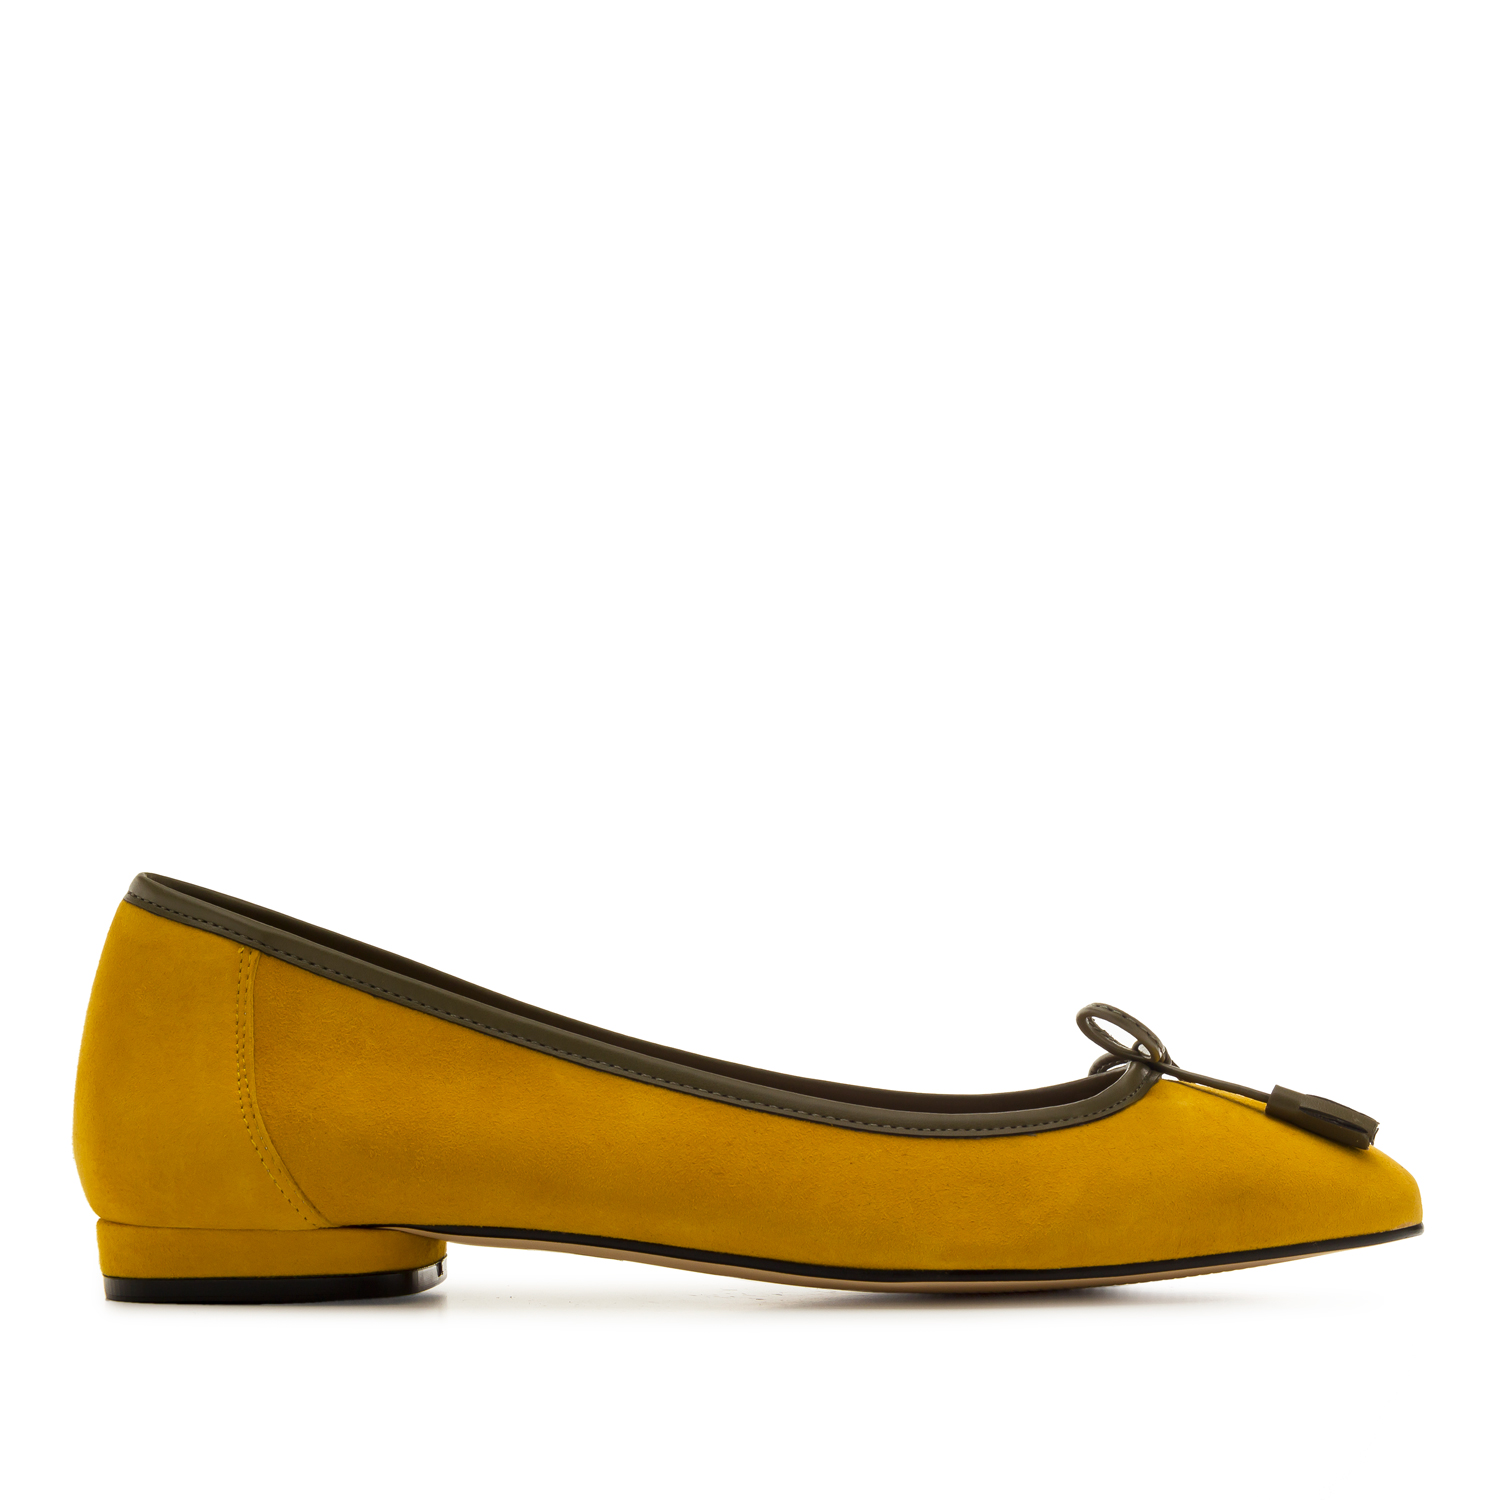 Bow Ballet Flats in Mustard Suede Leather 